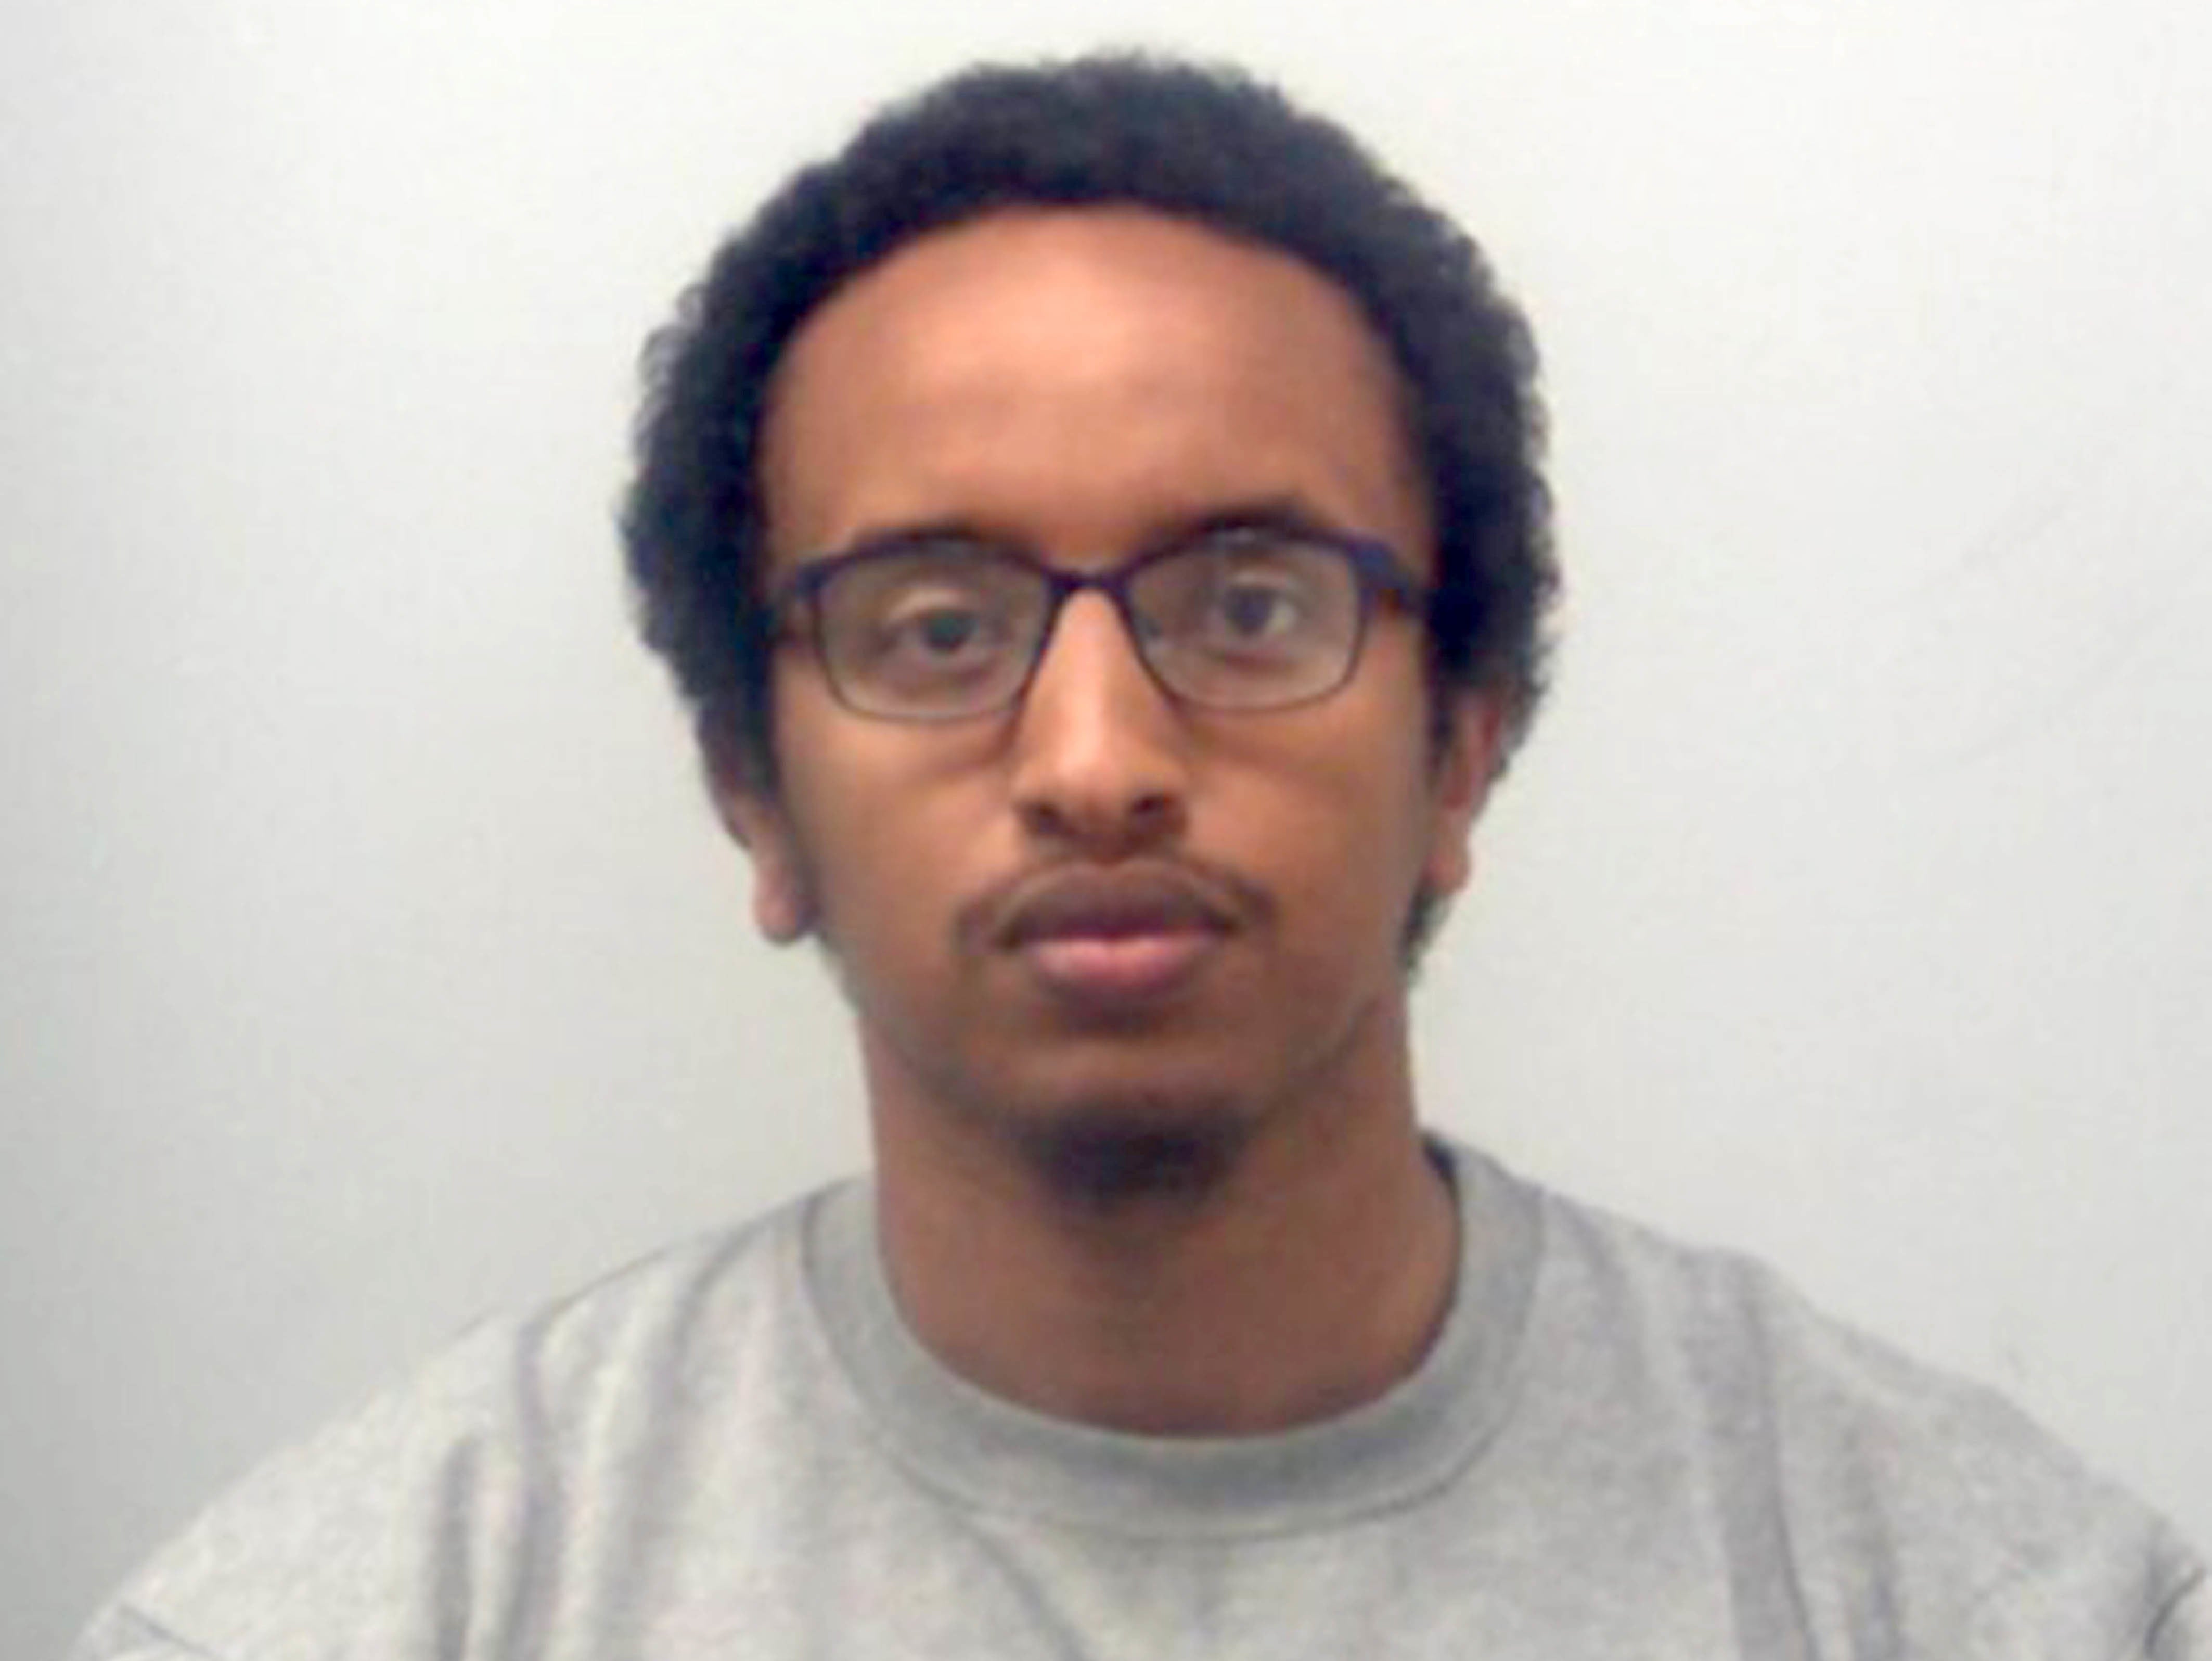 Ali Harbi Ali, 26, who has been found guilty at the Old Bailey of murdering Conservative MP Sir David Amess and preparing acts of terrorism